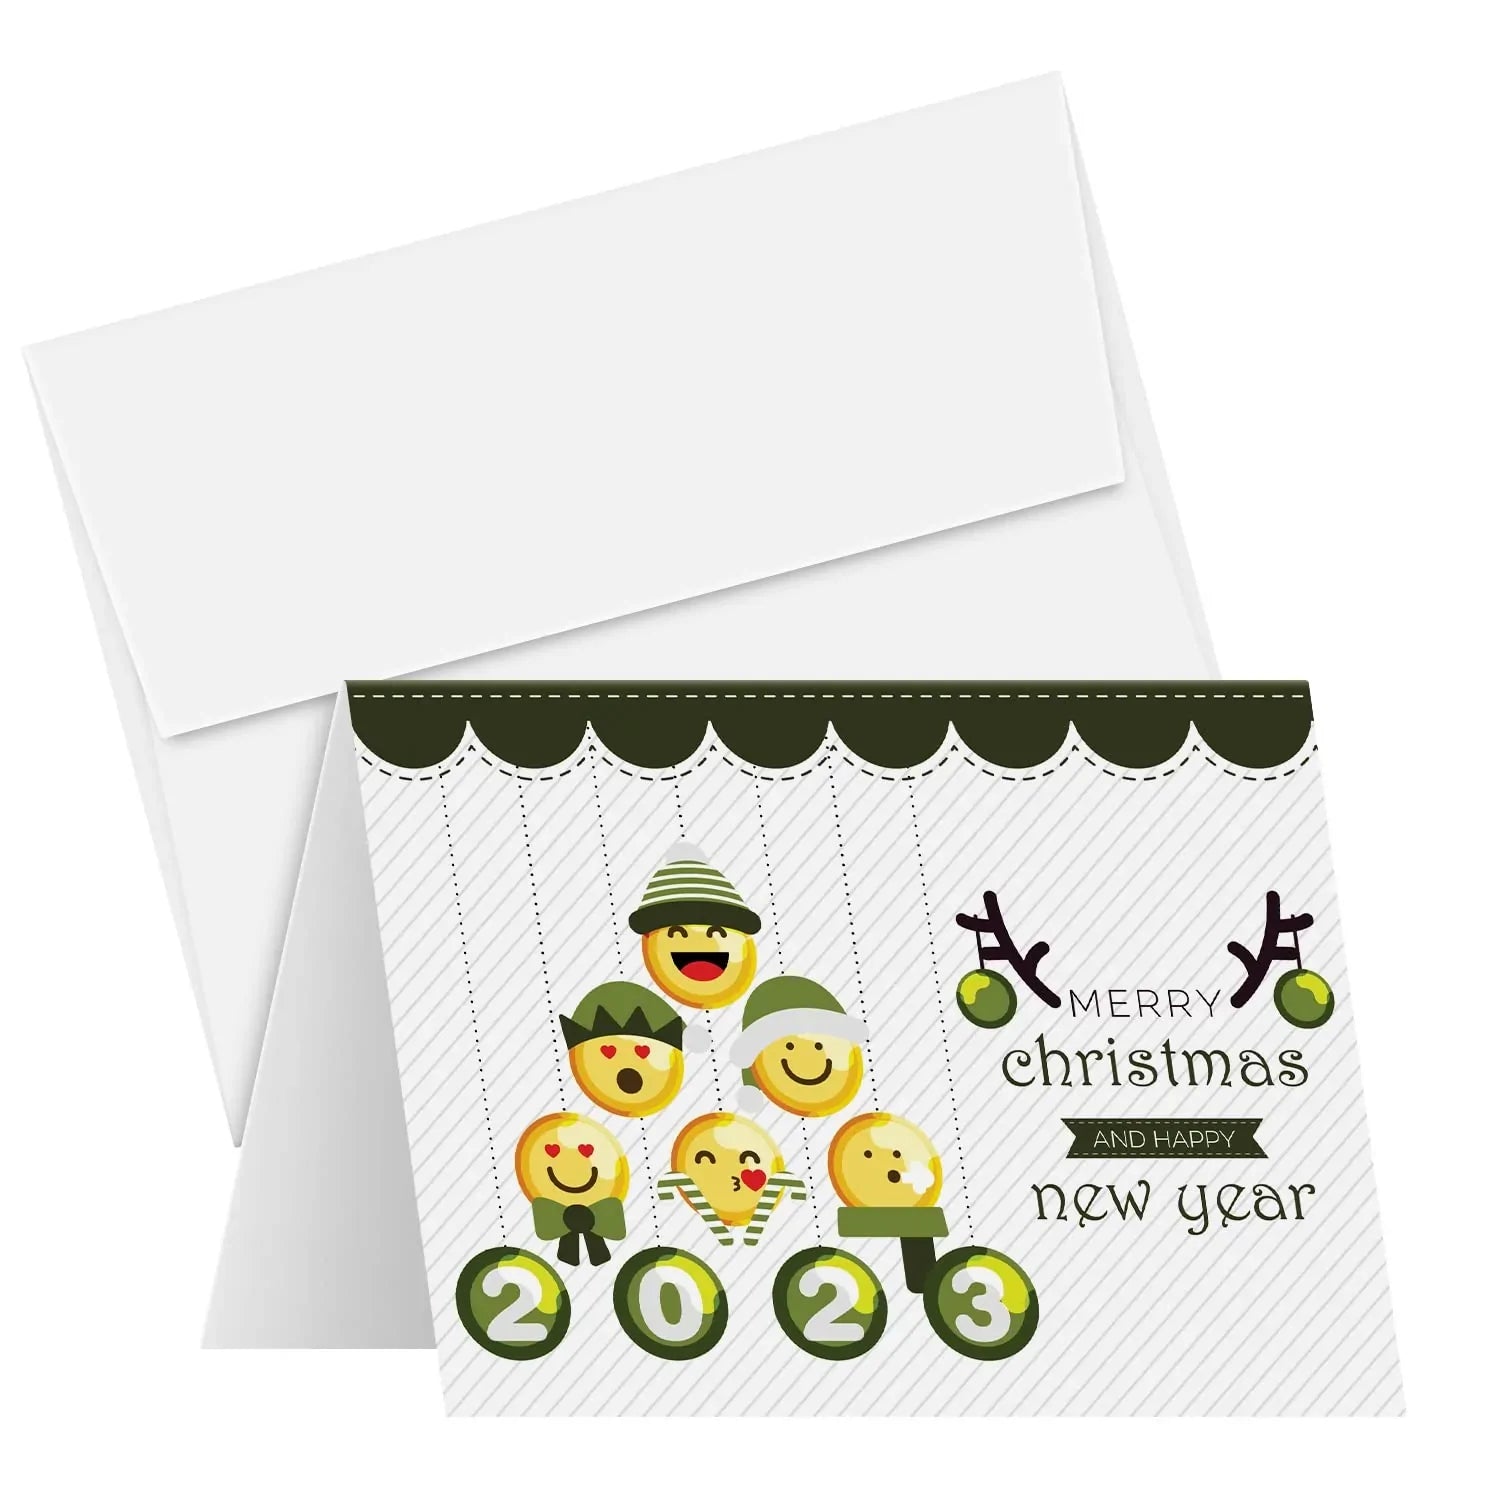 Greeting Cards Greeting Cards, Gift Cards Envelope